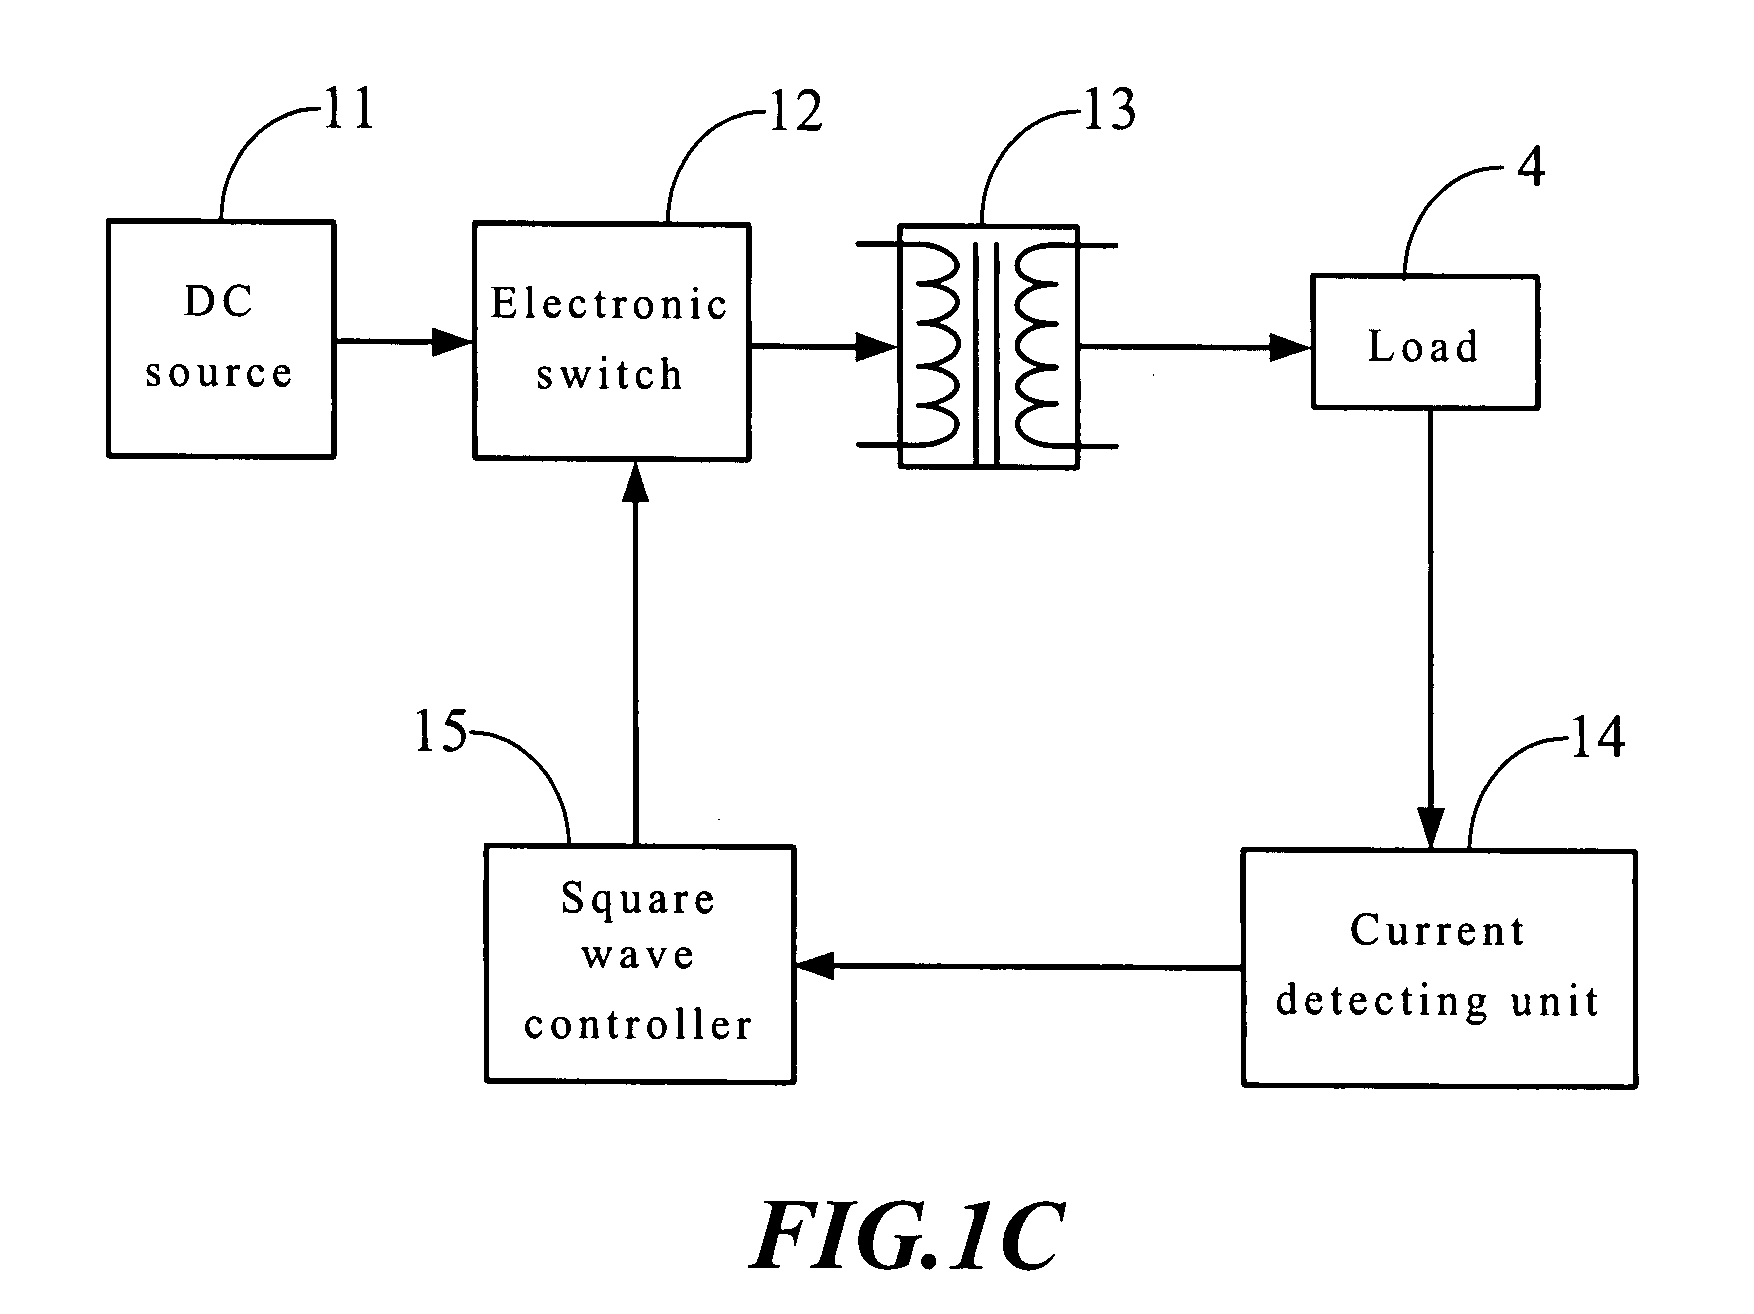 Locked phase active power current control circuit